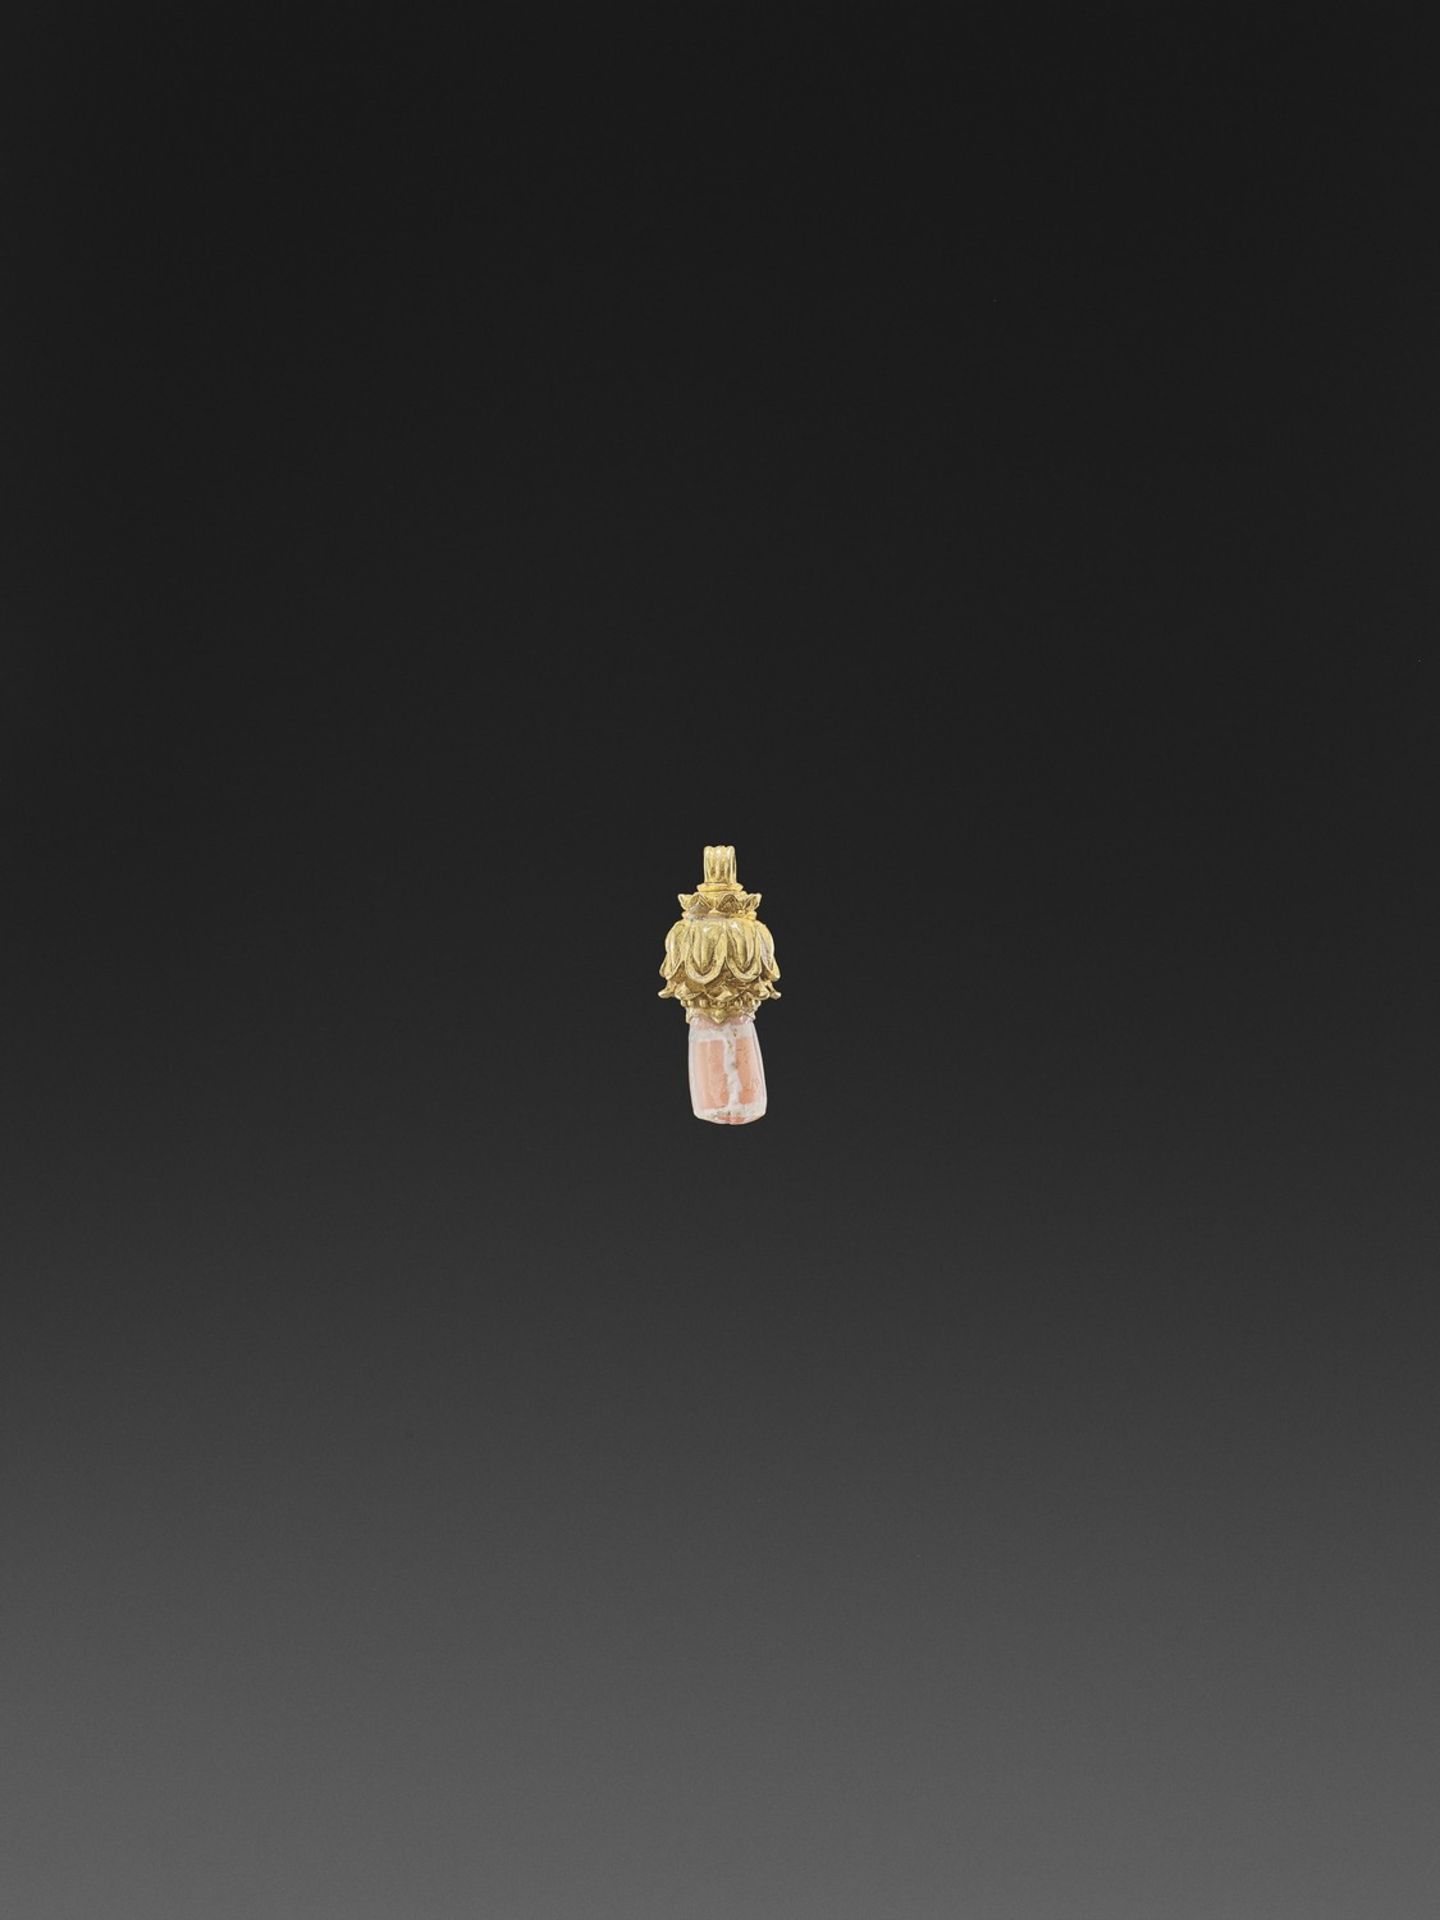 A PYU GOLD ‘LOTUS’ PENDANT WITH AGATE BEAD - Image 4 of 4